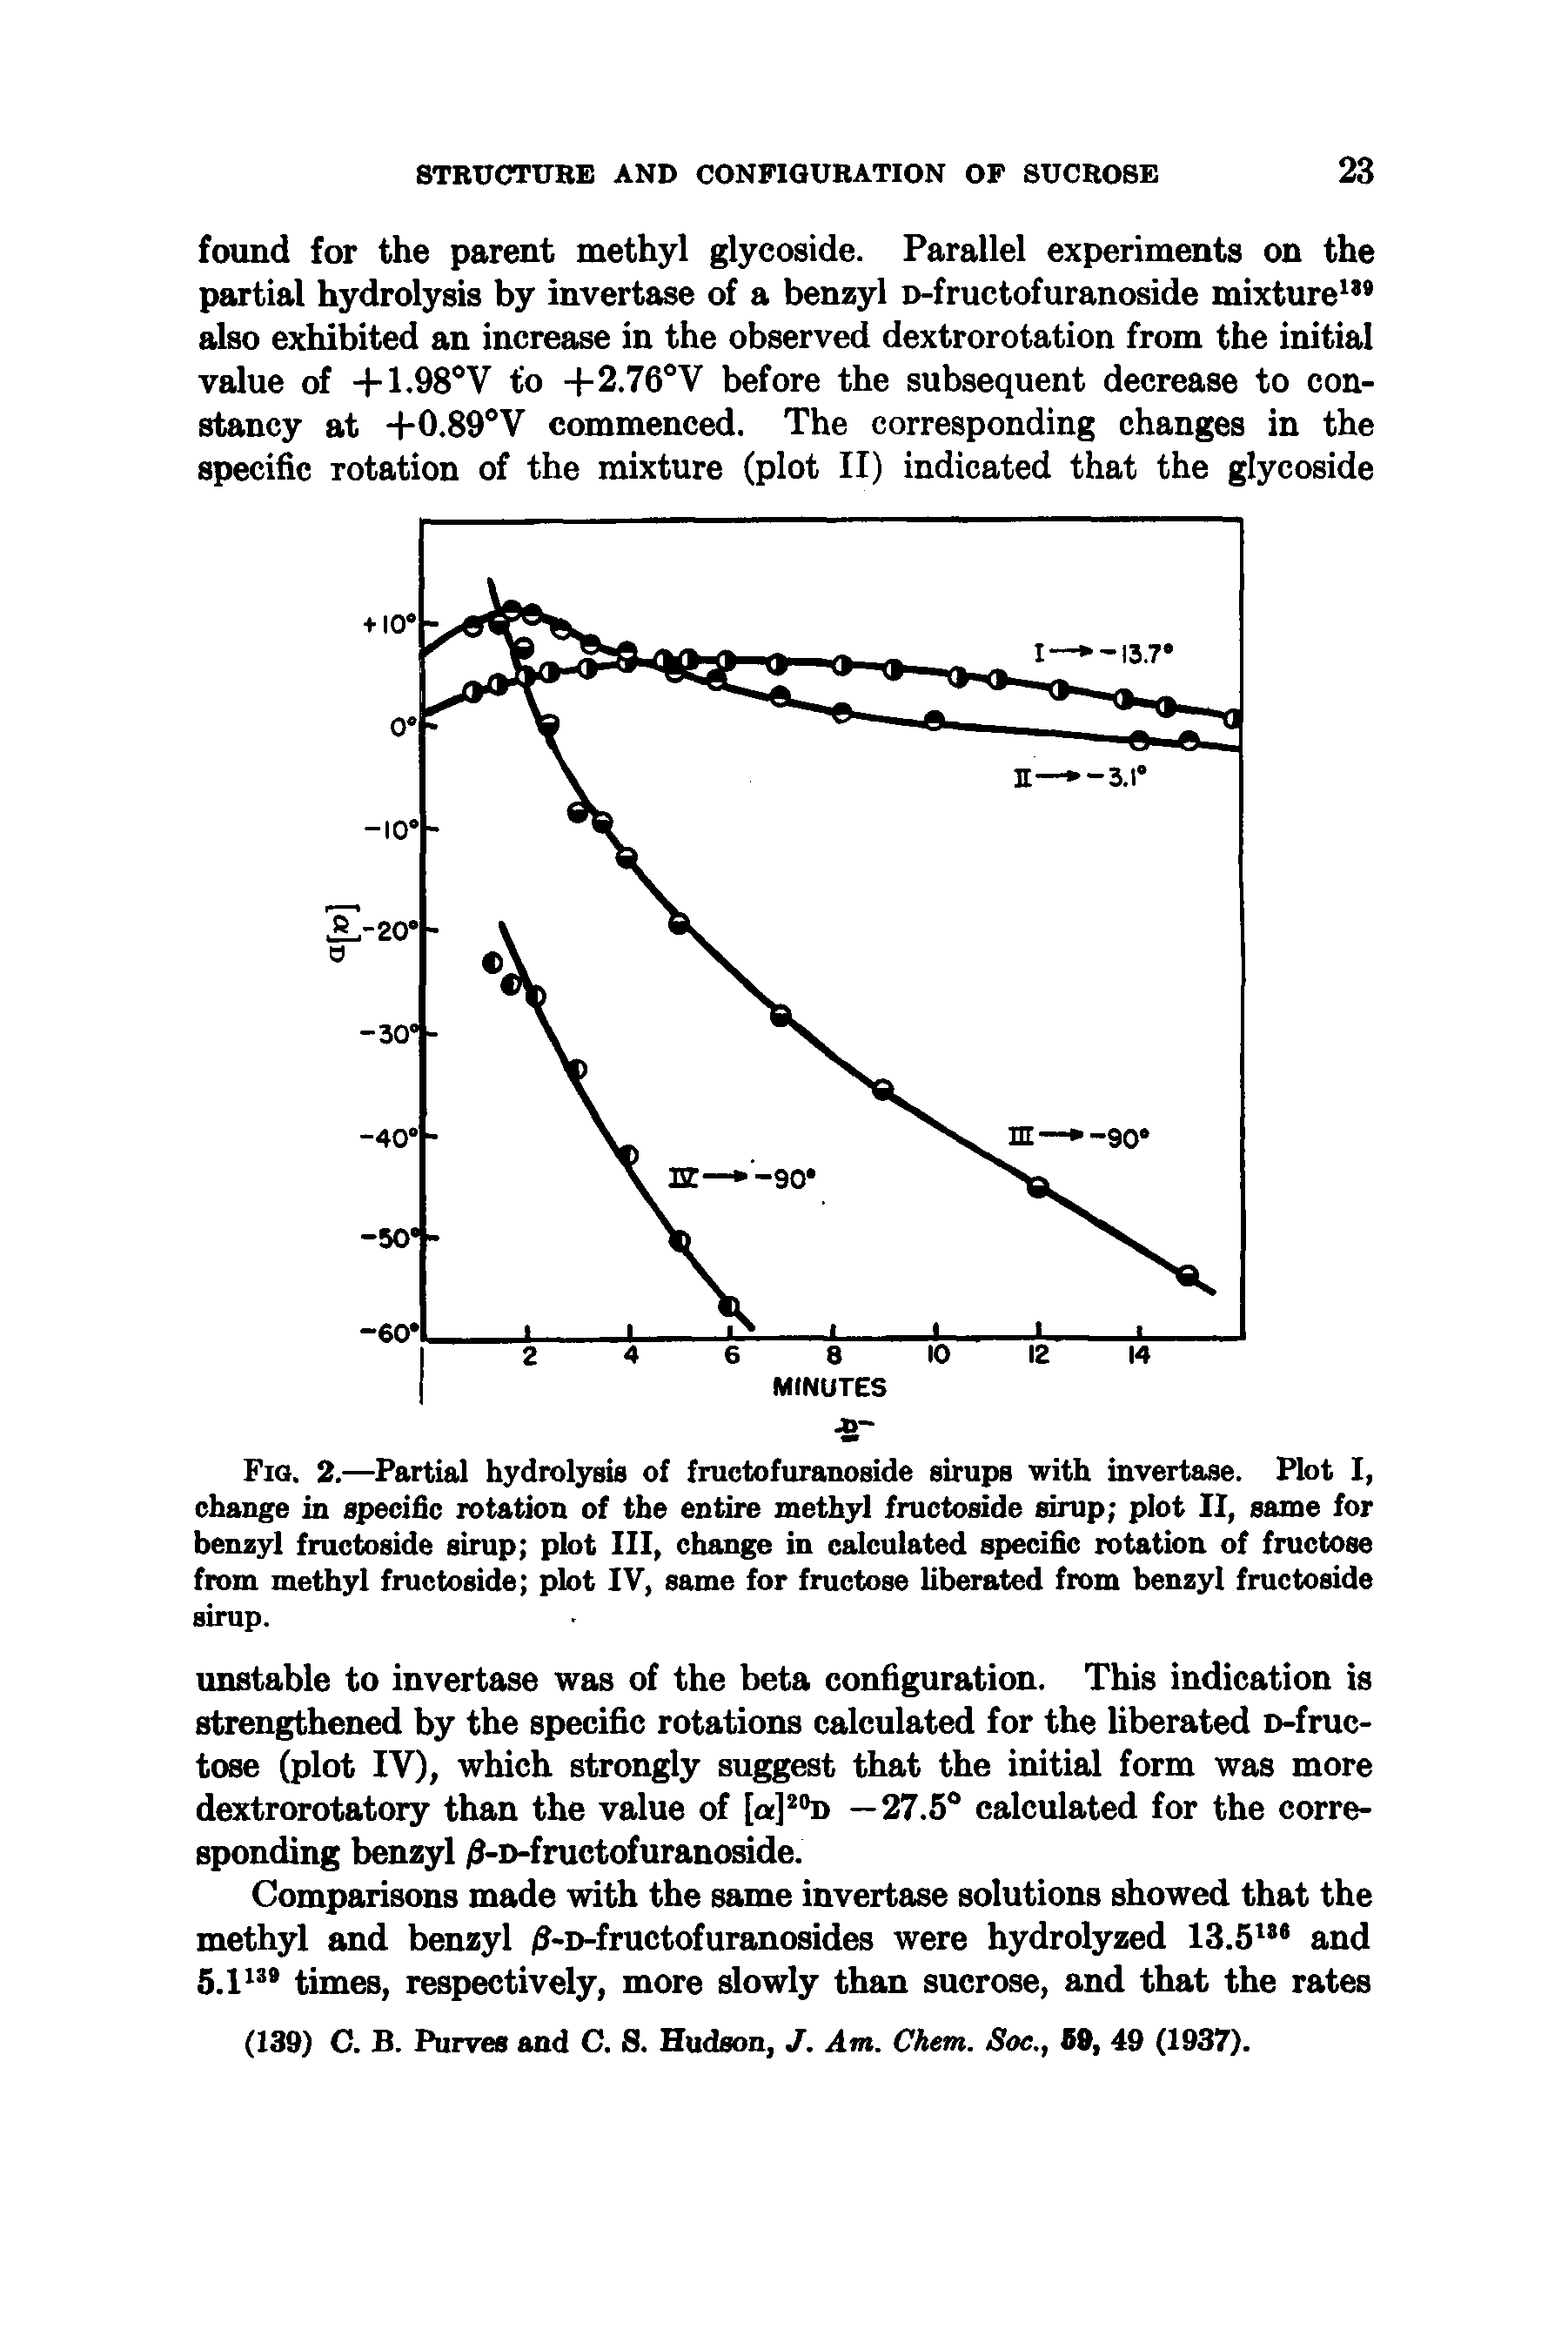 Fig. 2.—Partial hydrolysis of fructofnranoside sirups with invertase. Plot I, change in specific rotation of the entire methyl fructoside sirup plot II, same for benzyl fructoside sirup plot III, change in calculated specific rotation of fructose from methyl fructoside plot IV, same for fructose liberated from benzyl fructoside sirup.